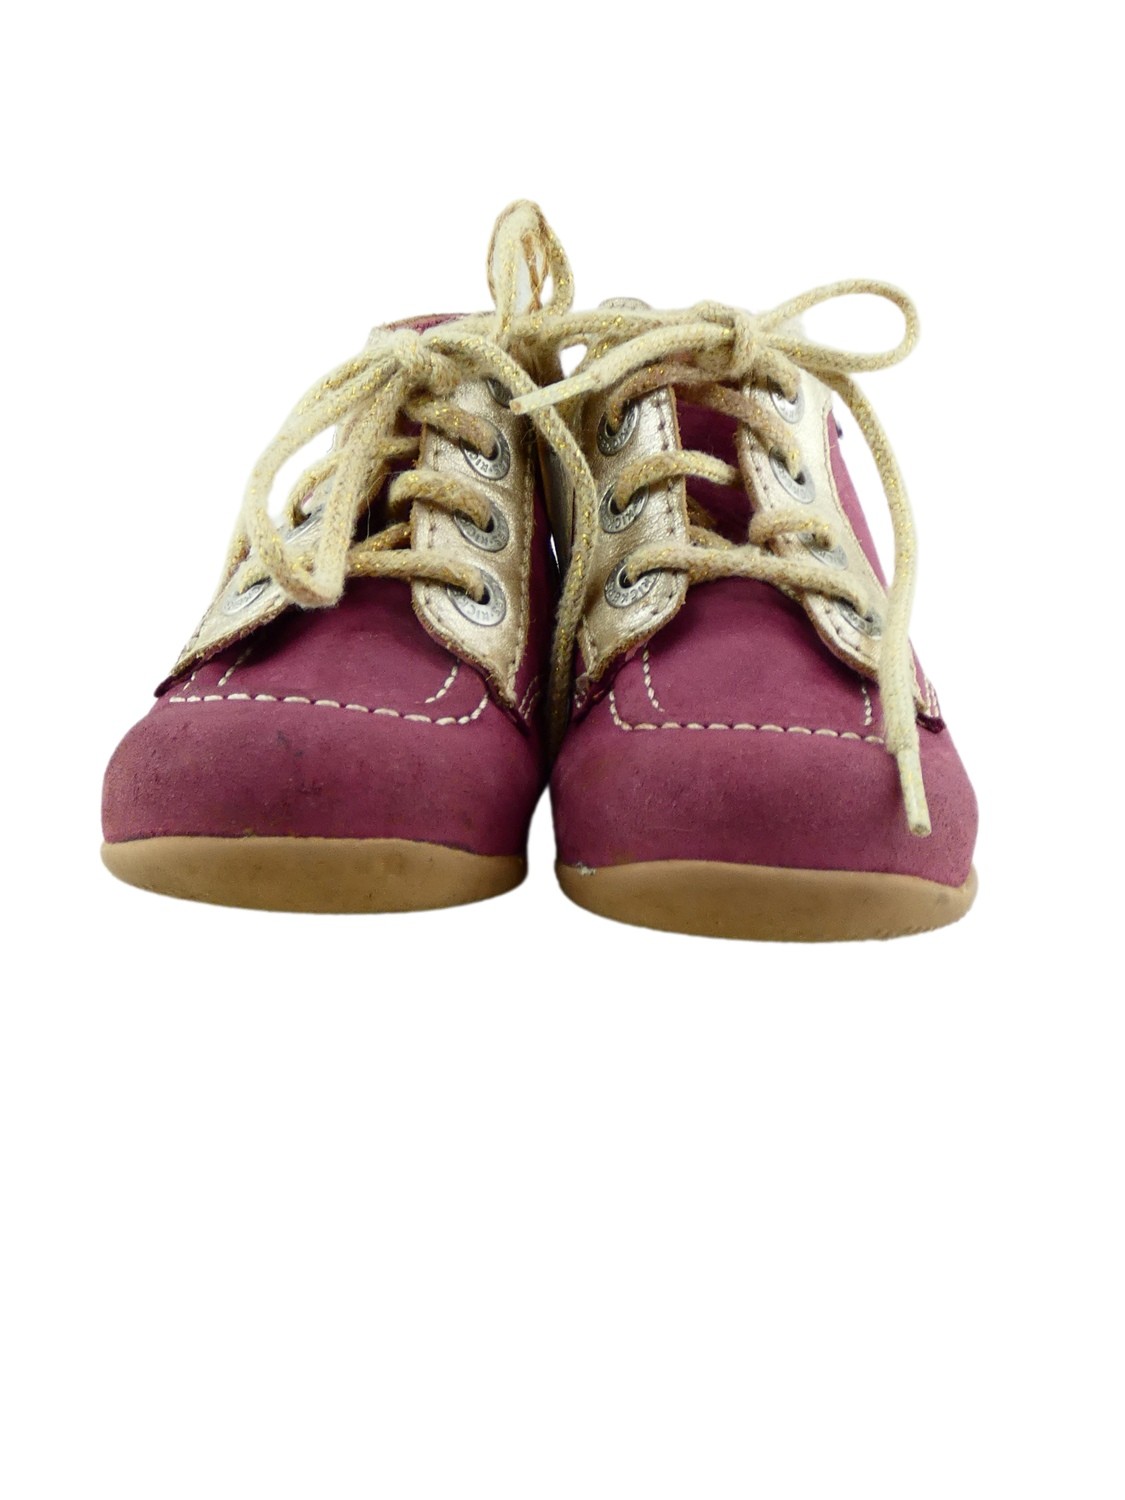 Chaussure bébé fille kickers taille 20 - Kickers | Beebs